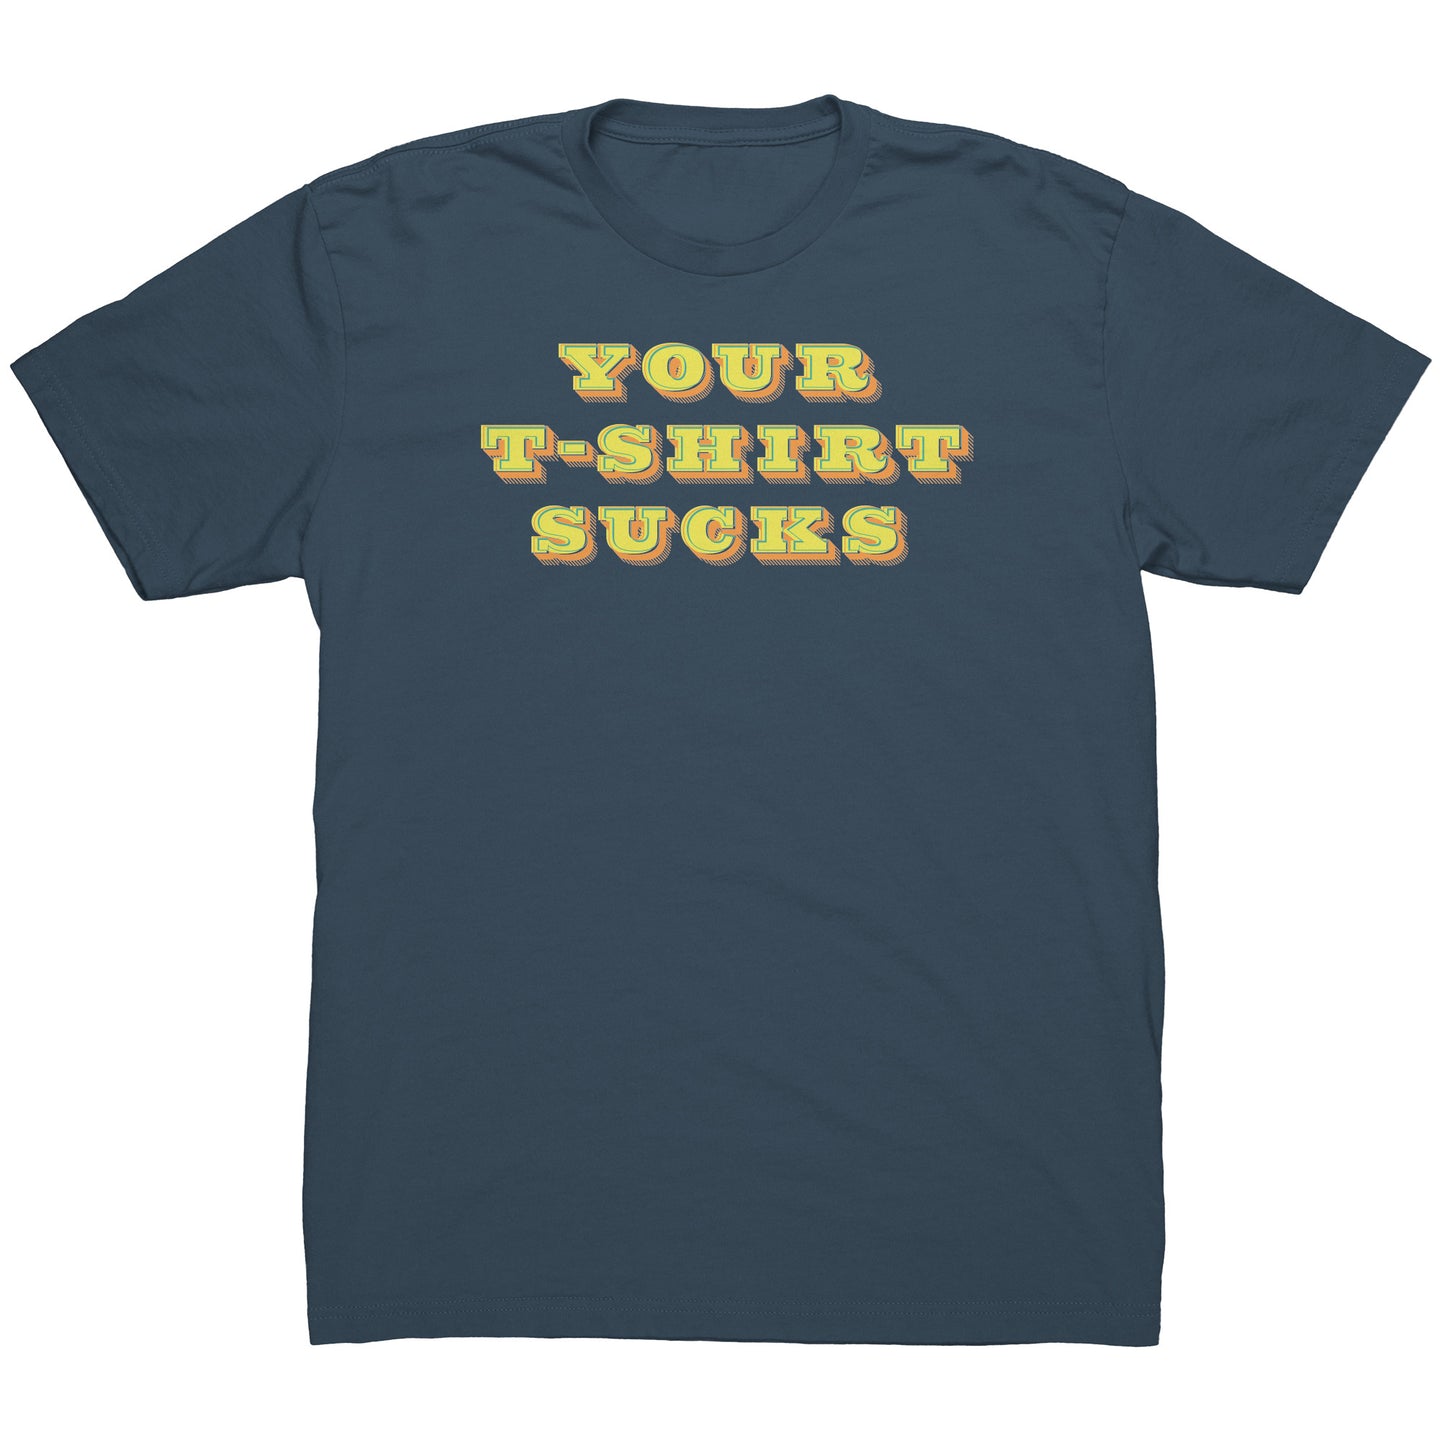 THAT'S YOUR OPINION! t-shirt